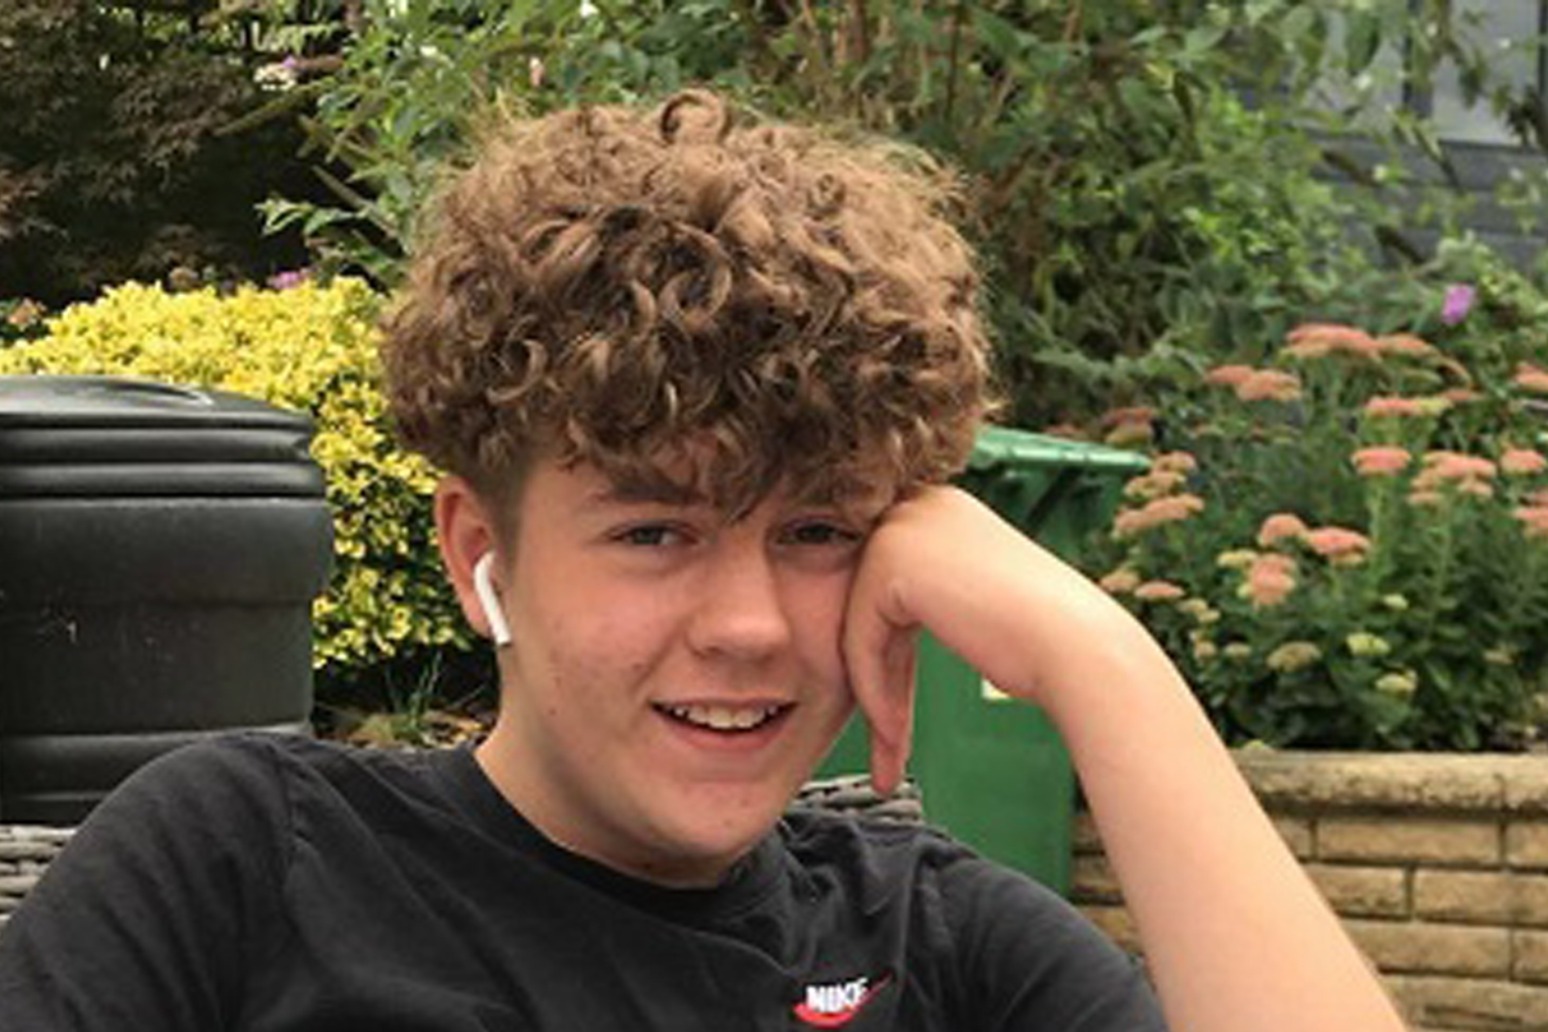 Two teenage boys found guilty of murdering 13-year-old Olly Stephens 